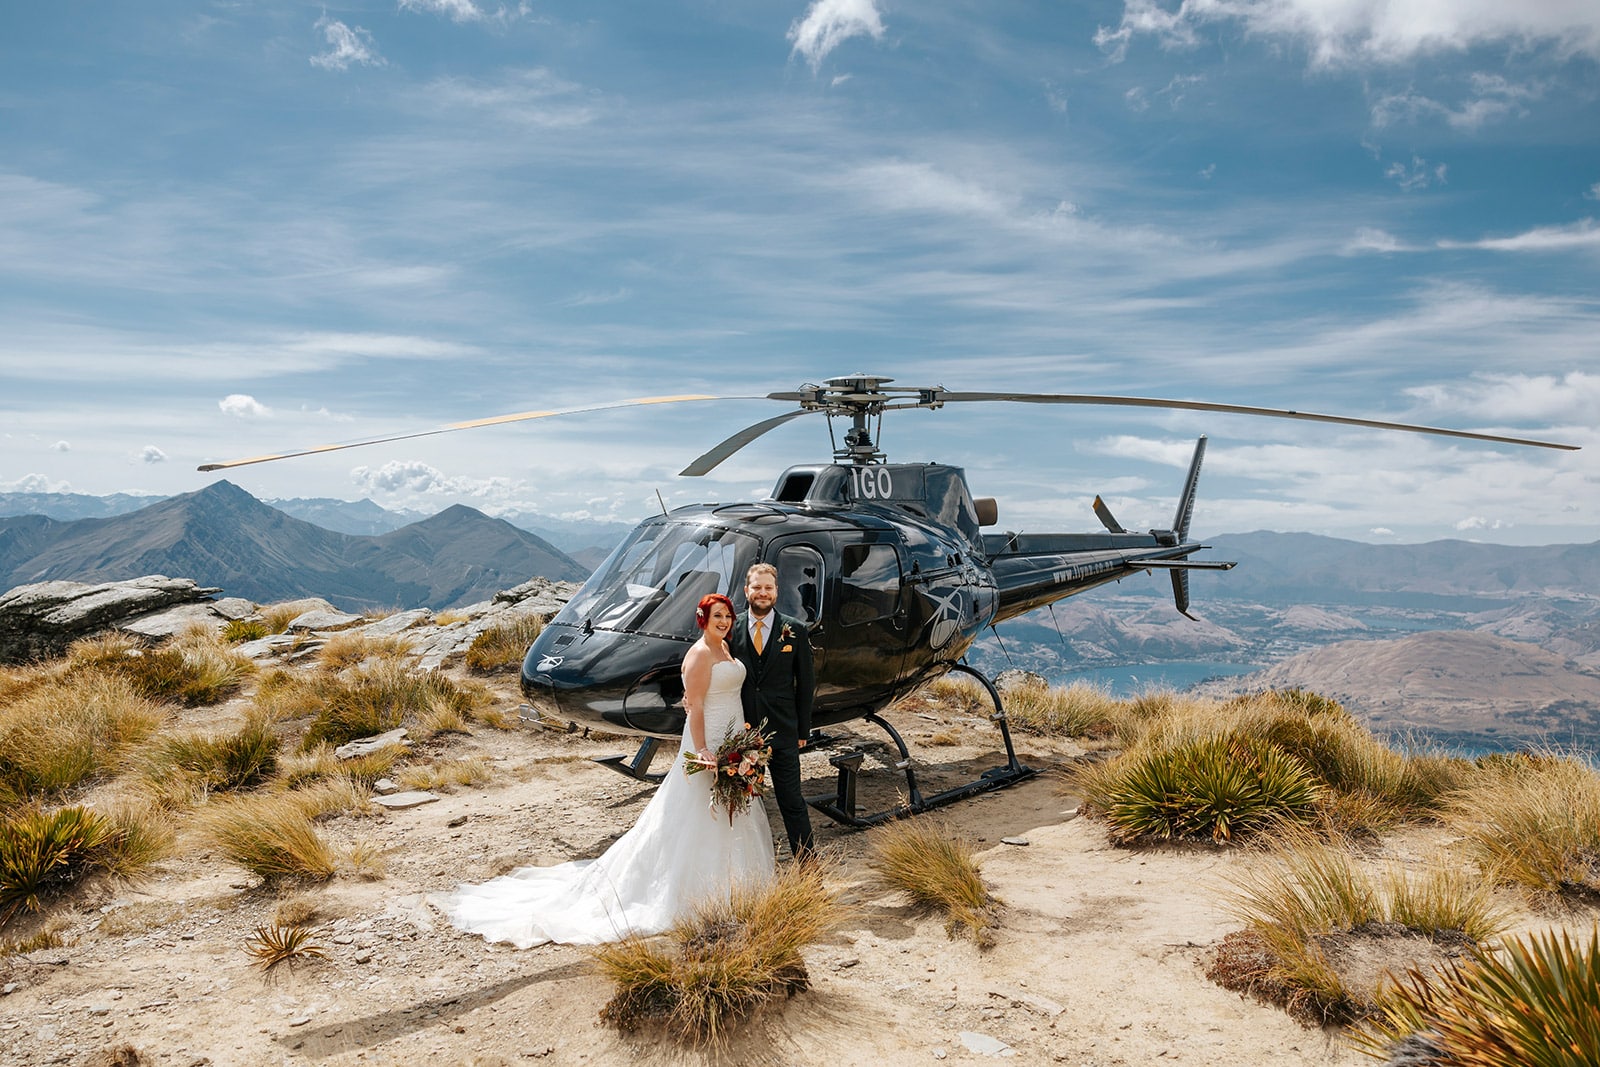 Heli Wedding Photos on The Ledge in Queenstown, bride with red hair